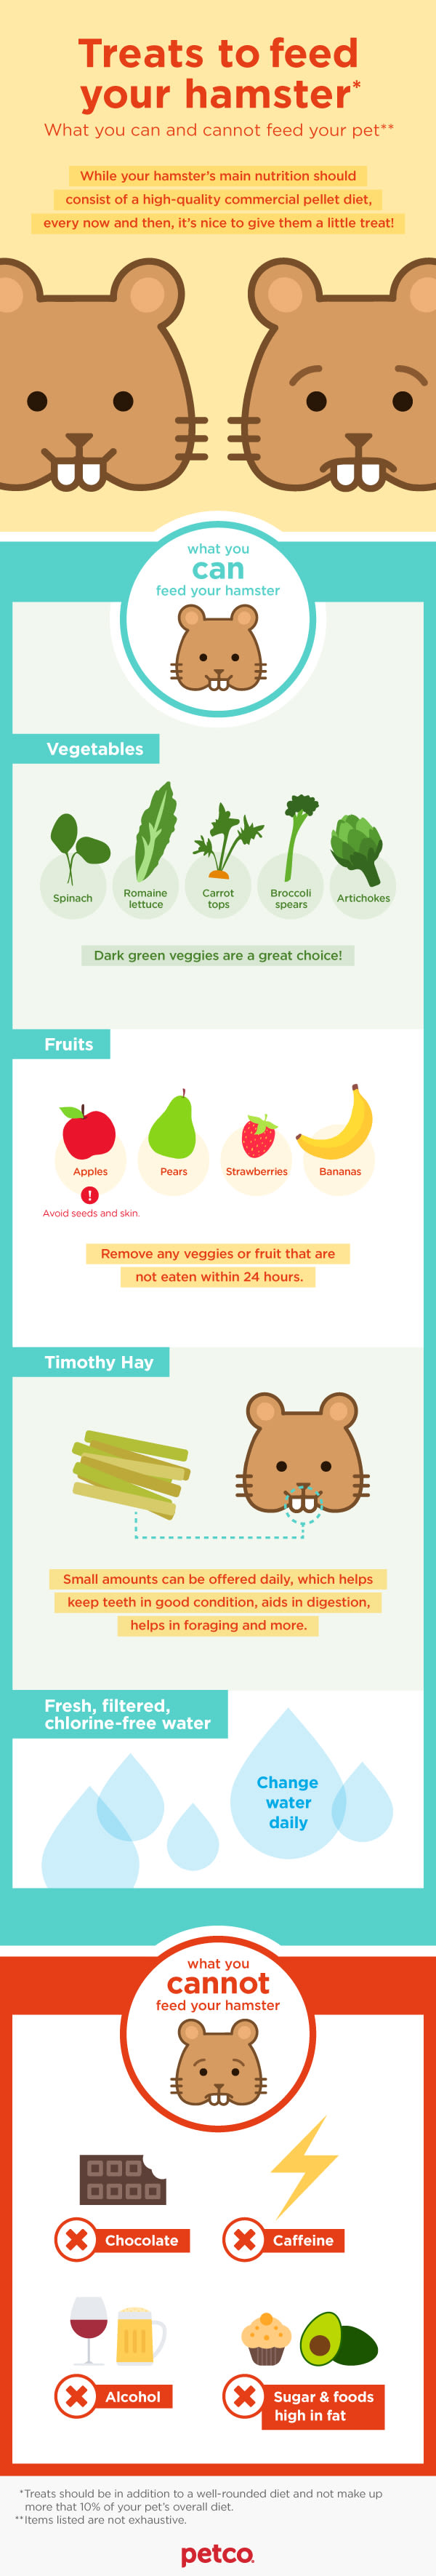 What Treats to Feed Your Hamster (and 